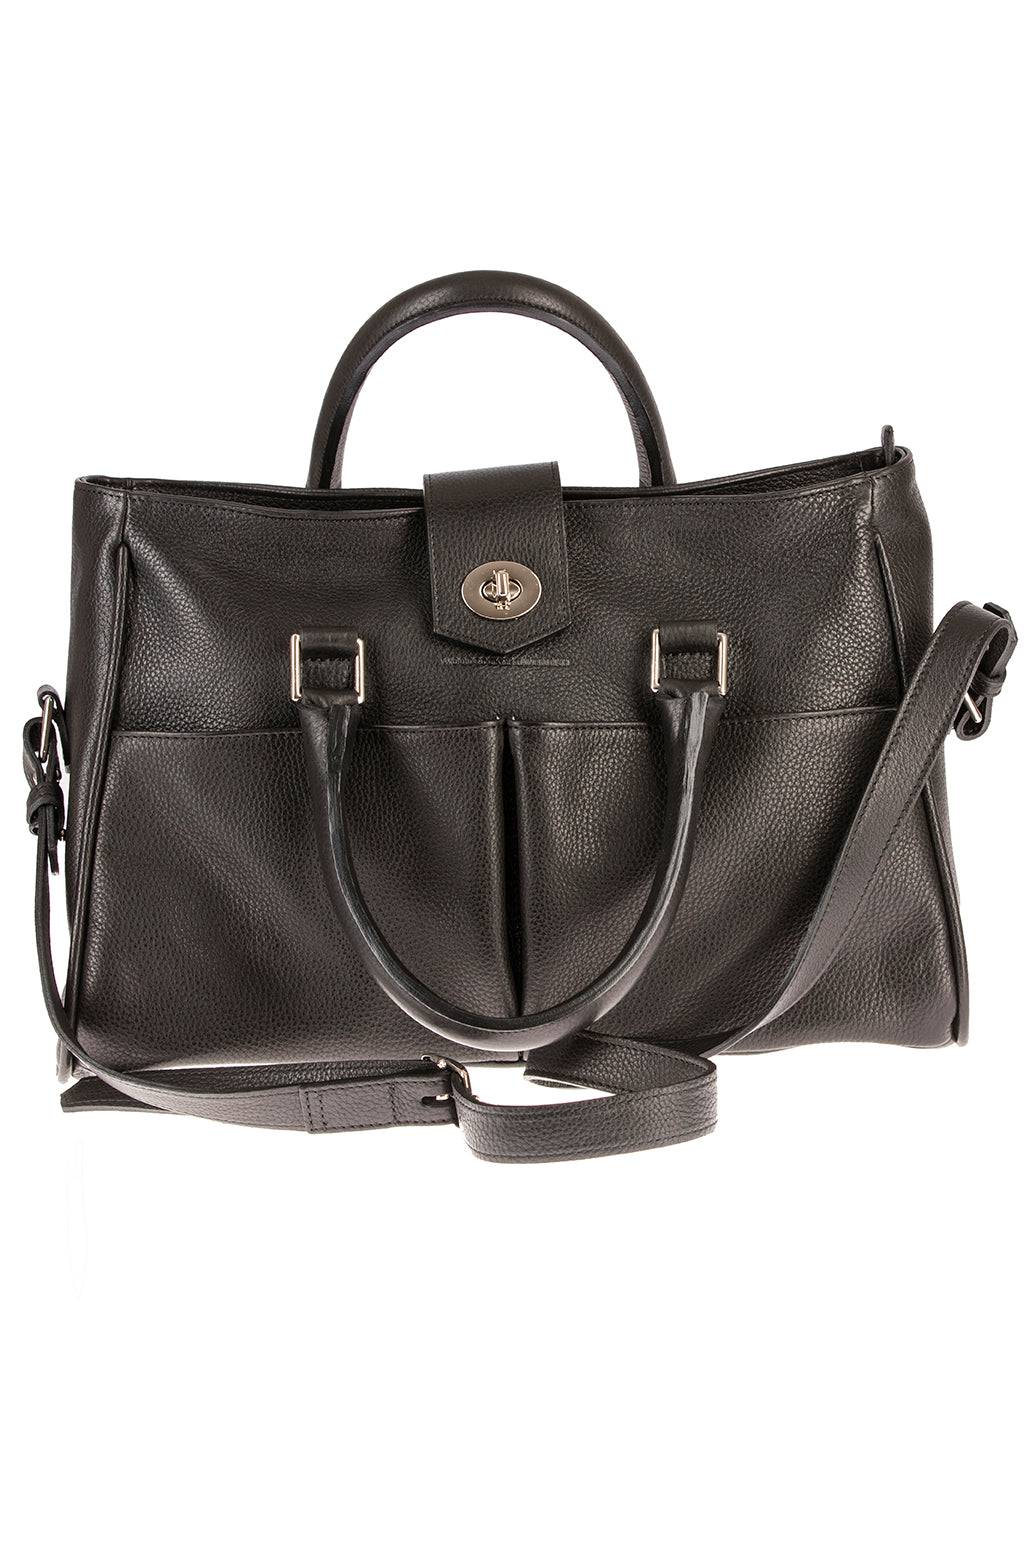 Cadogan Tote Bag in Black Leather by Woodcock & Cavendish for sale - Woodcock and Cavendish